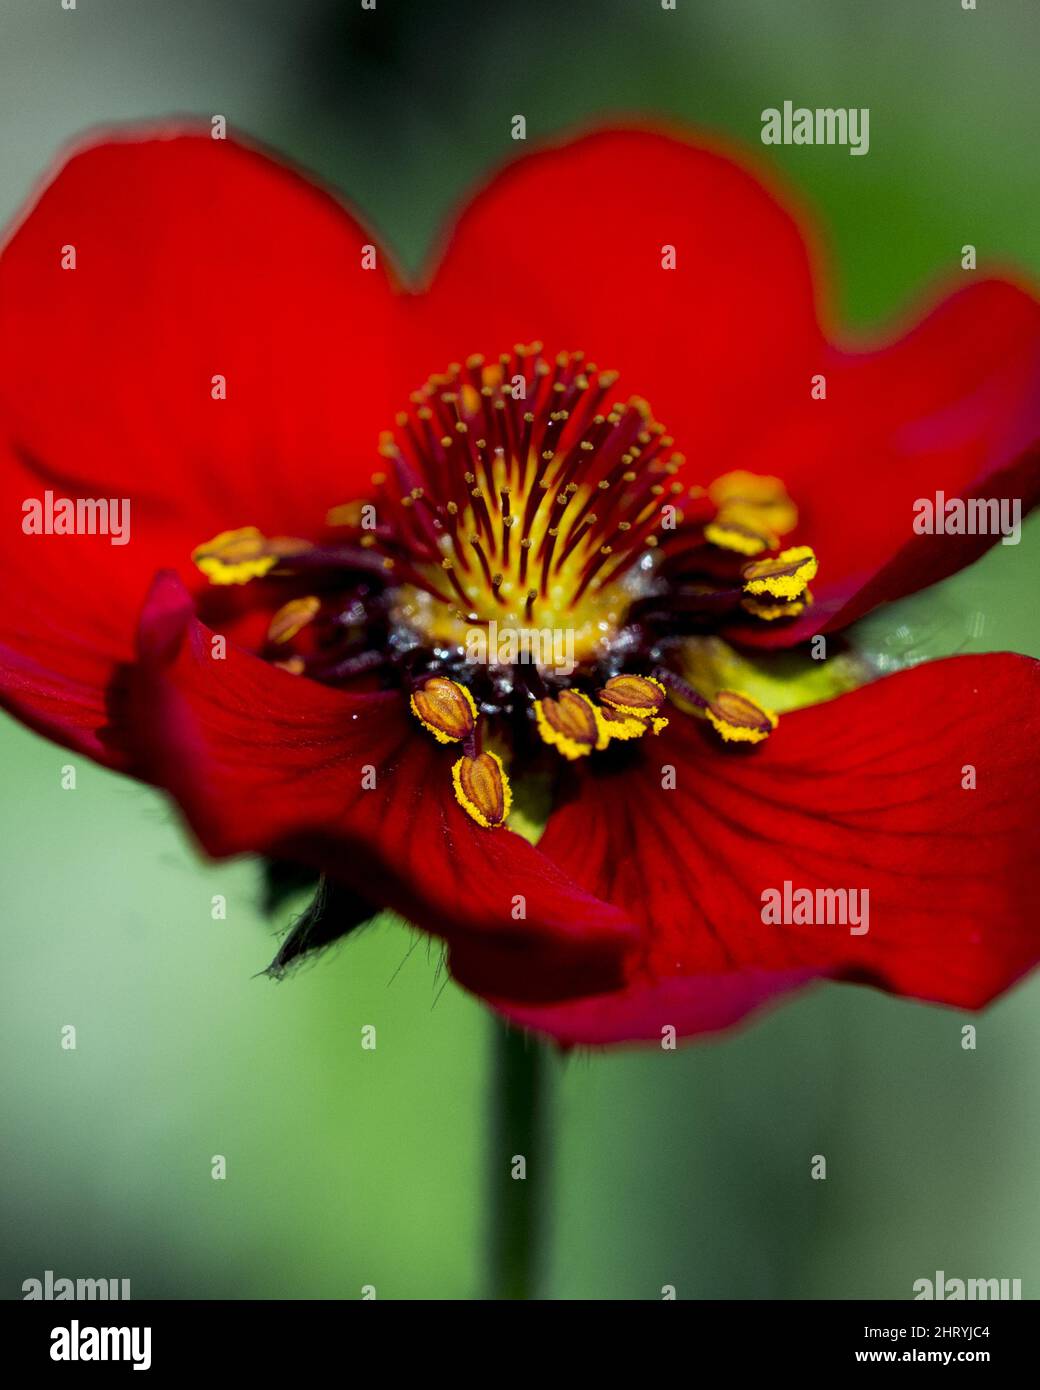 Macro shot of a red blossom Potentilla nepalensis flower Stock Photo